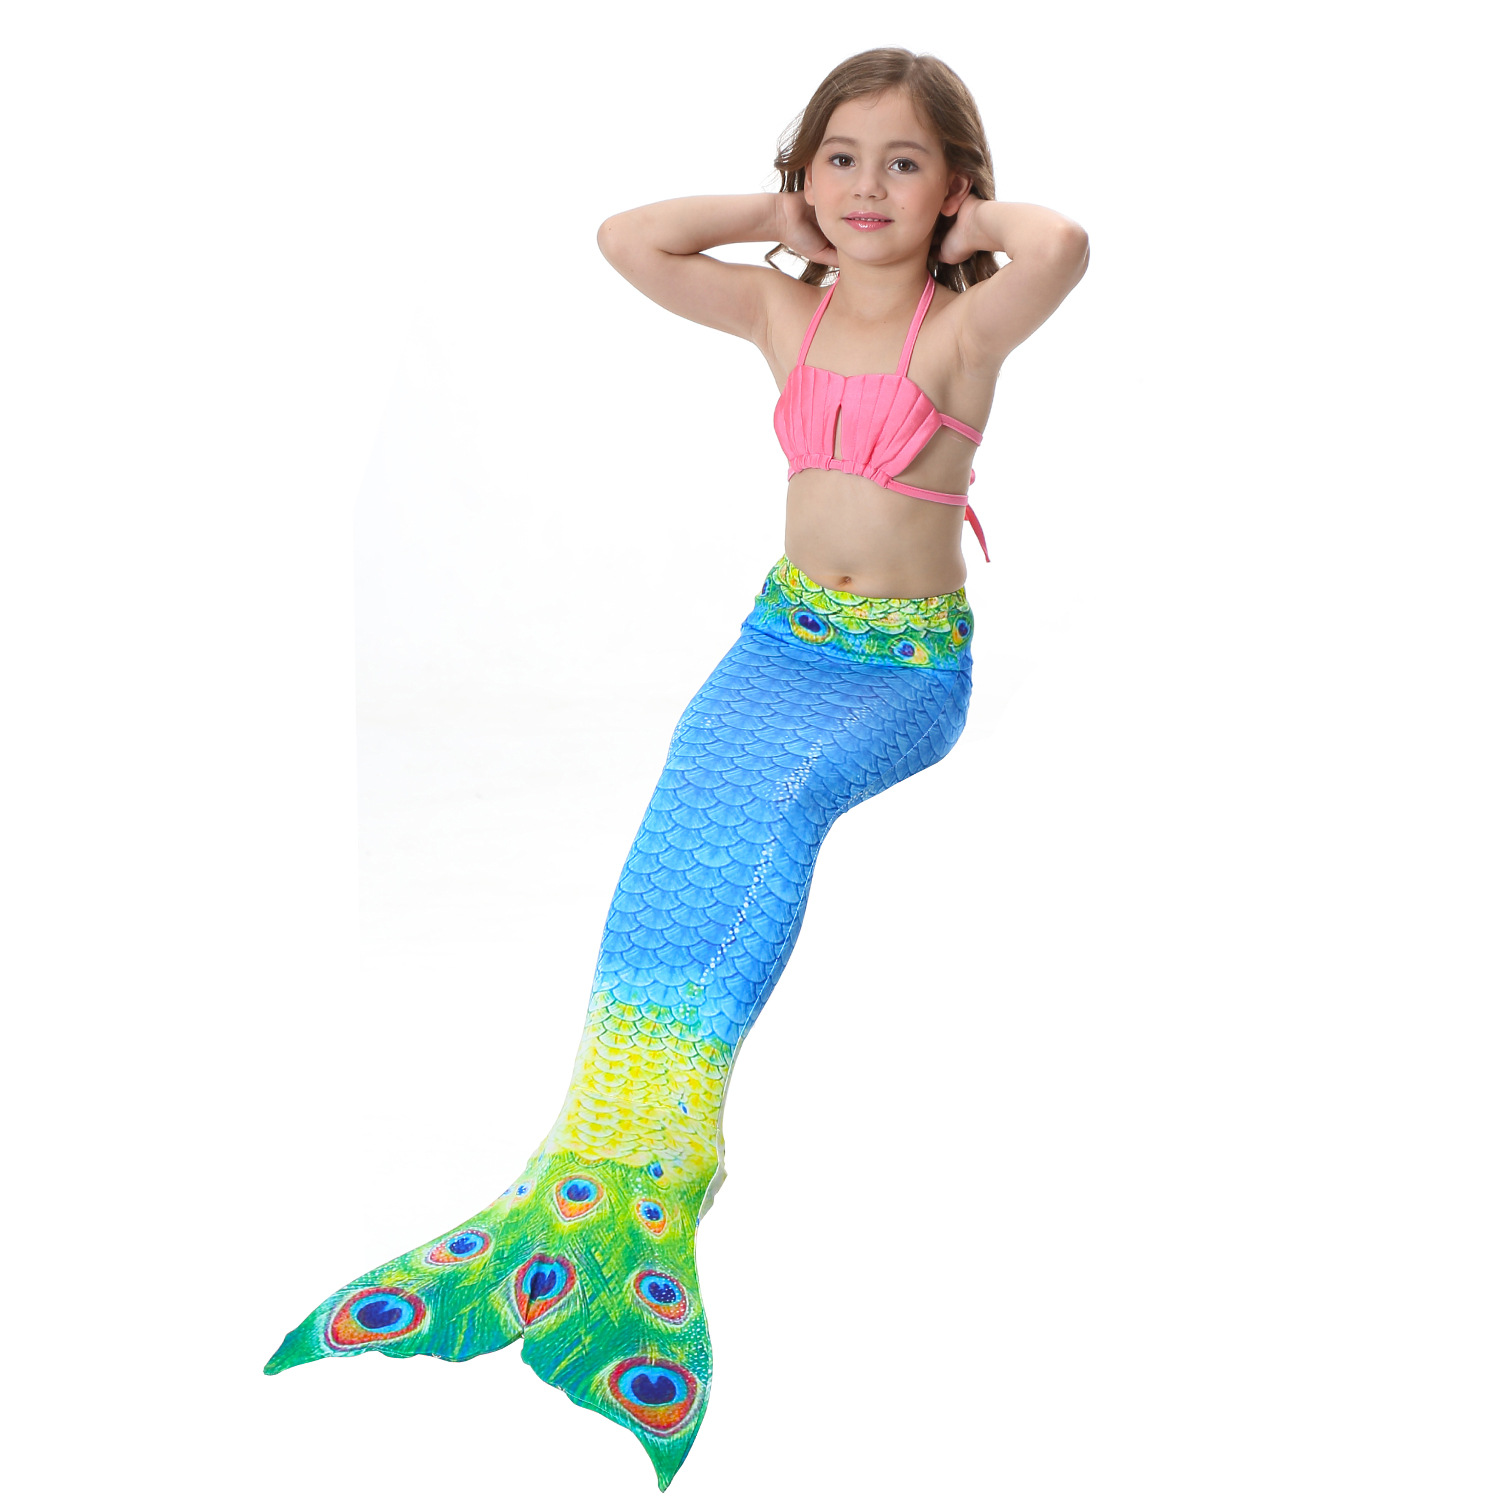 Fun-Mermaid-Tails-Swimming-Clothes-Gift-Best-Cosplay-Princess-Doll-Party-Dress-Gown-Skirts-1298569-7